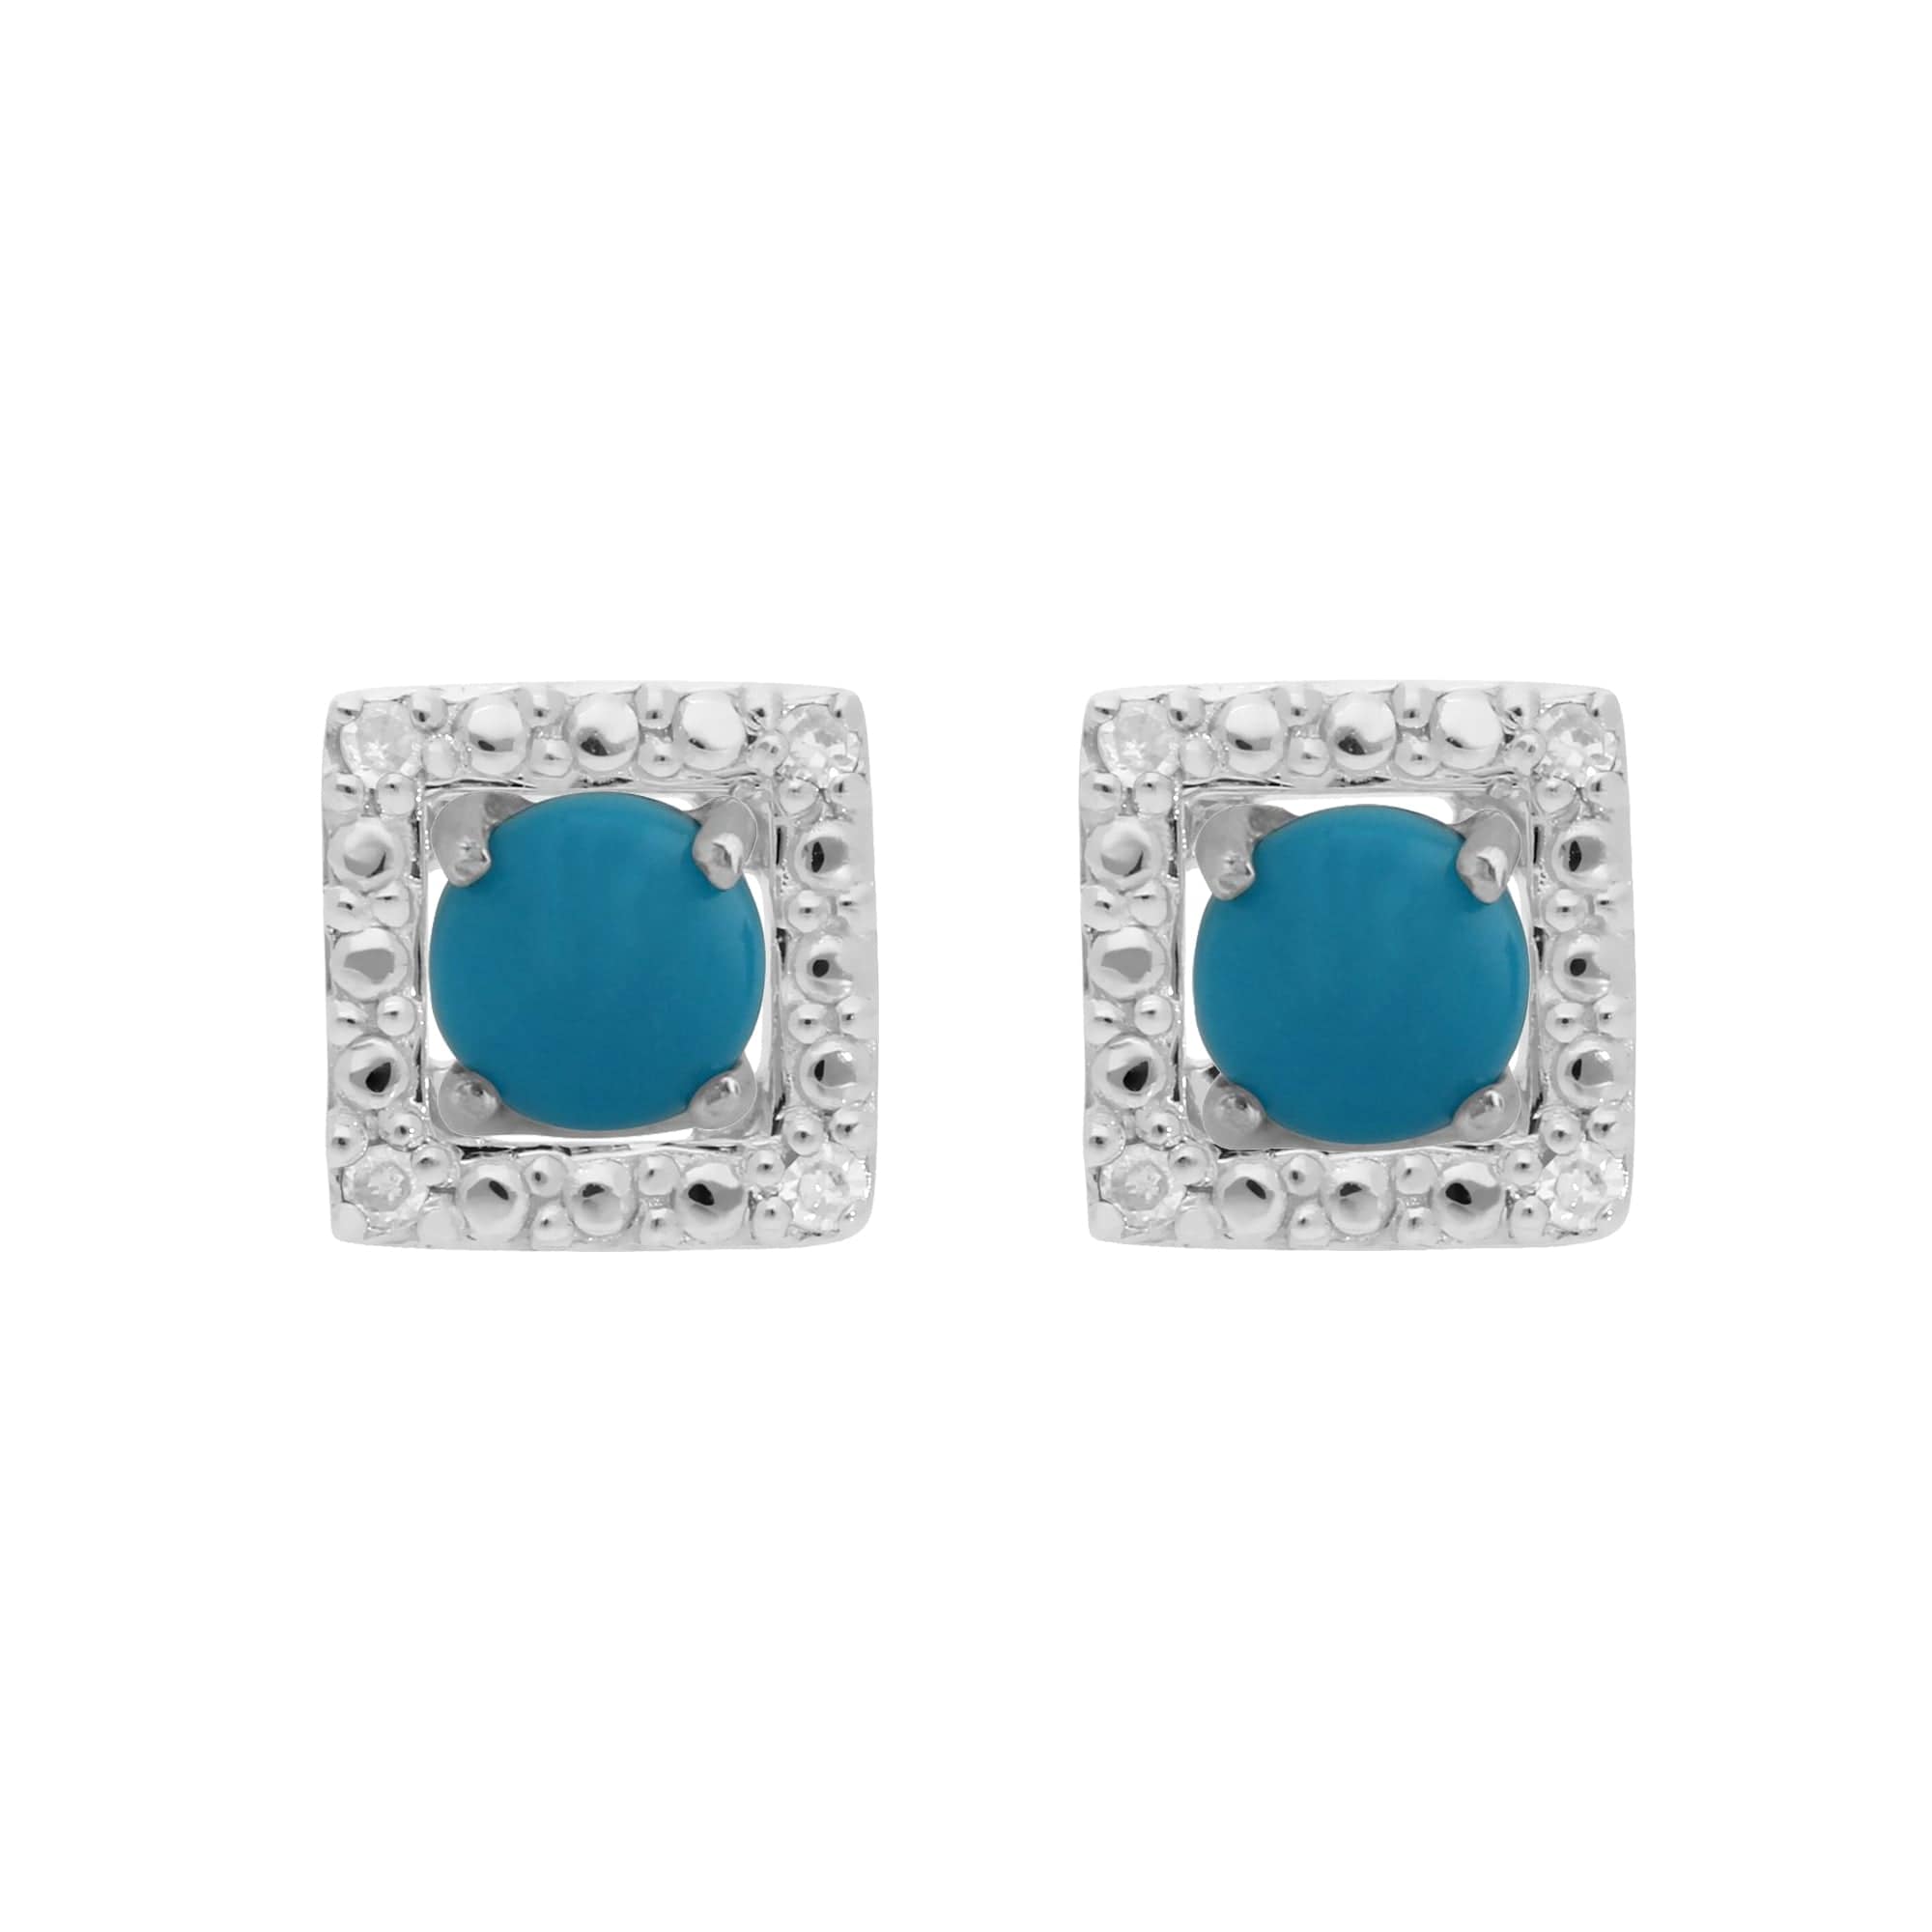 162E0071219-162E0245019 Classic Round Turquoise Stud Earrings with Detachable Diamond Square Ear Jacket in 9ct White Gold 1